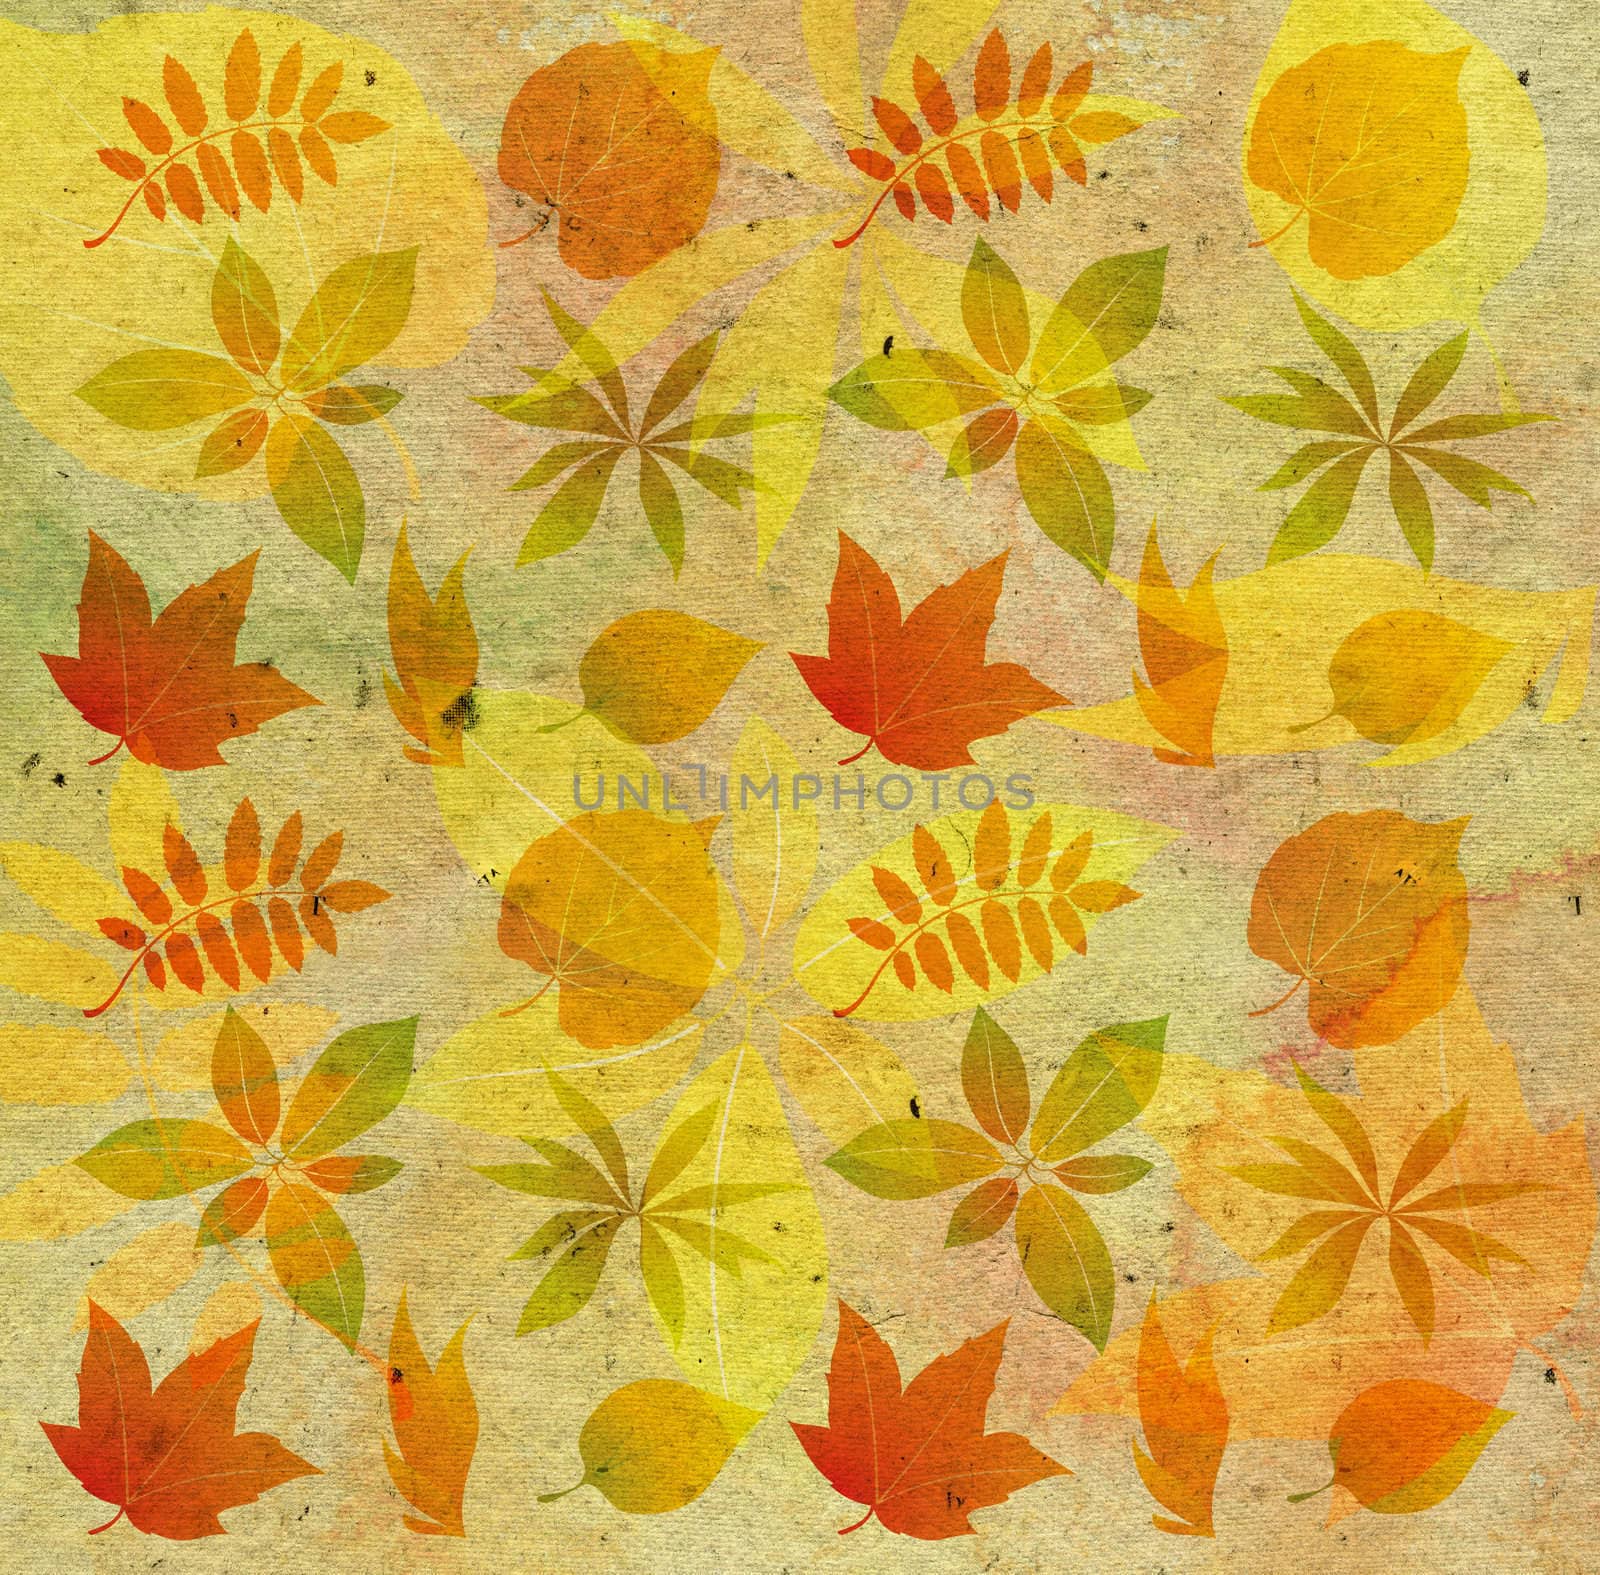 textured background with autumn leaf